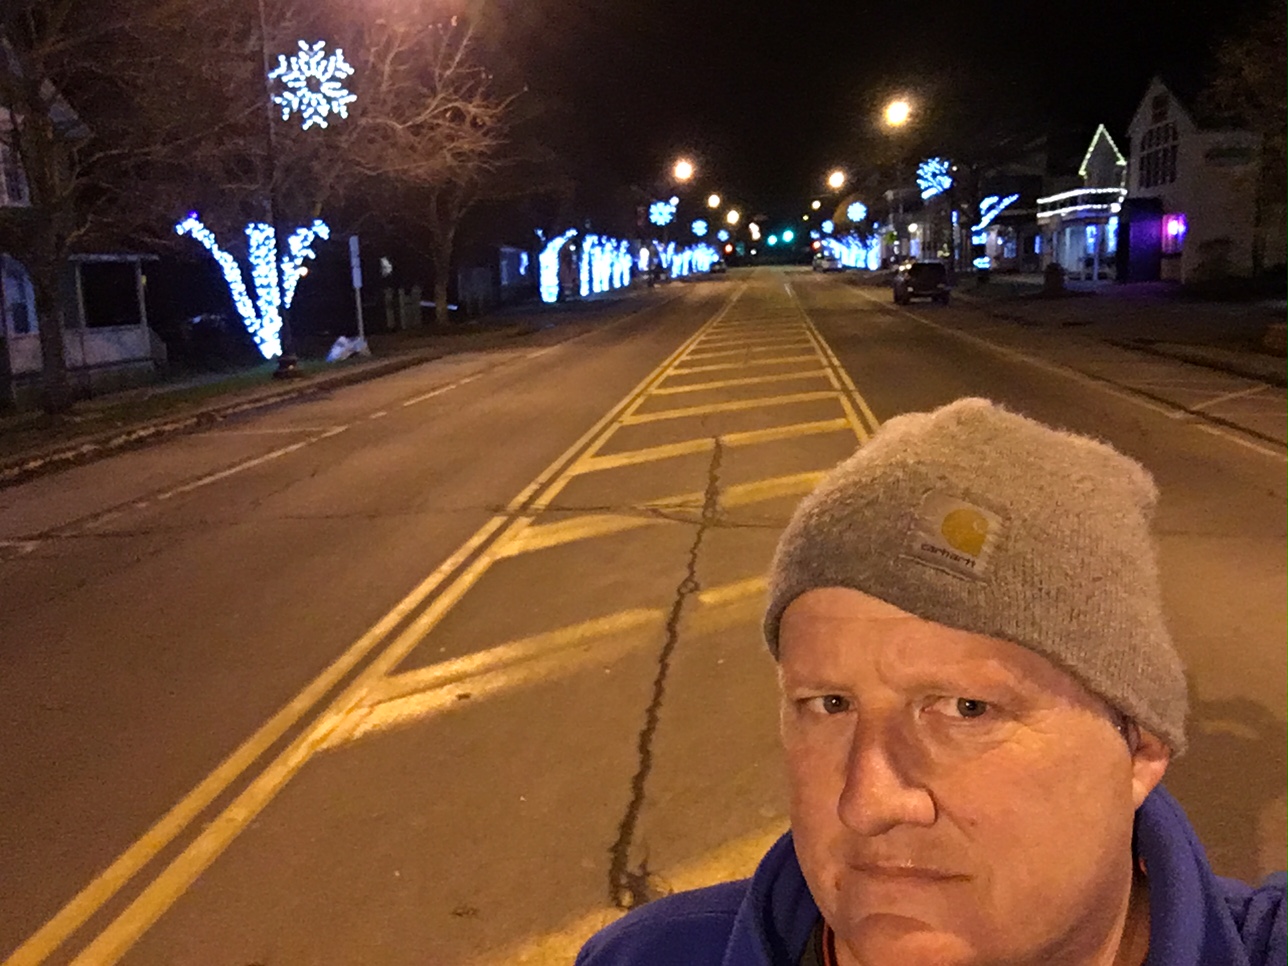 In Ellicottville: let there be light!